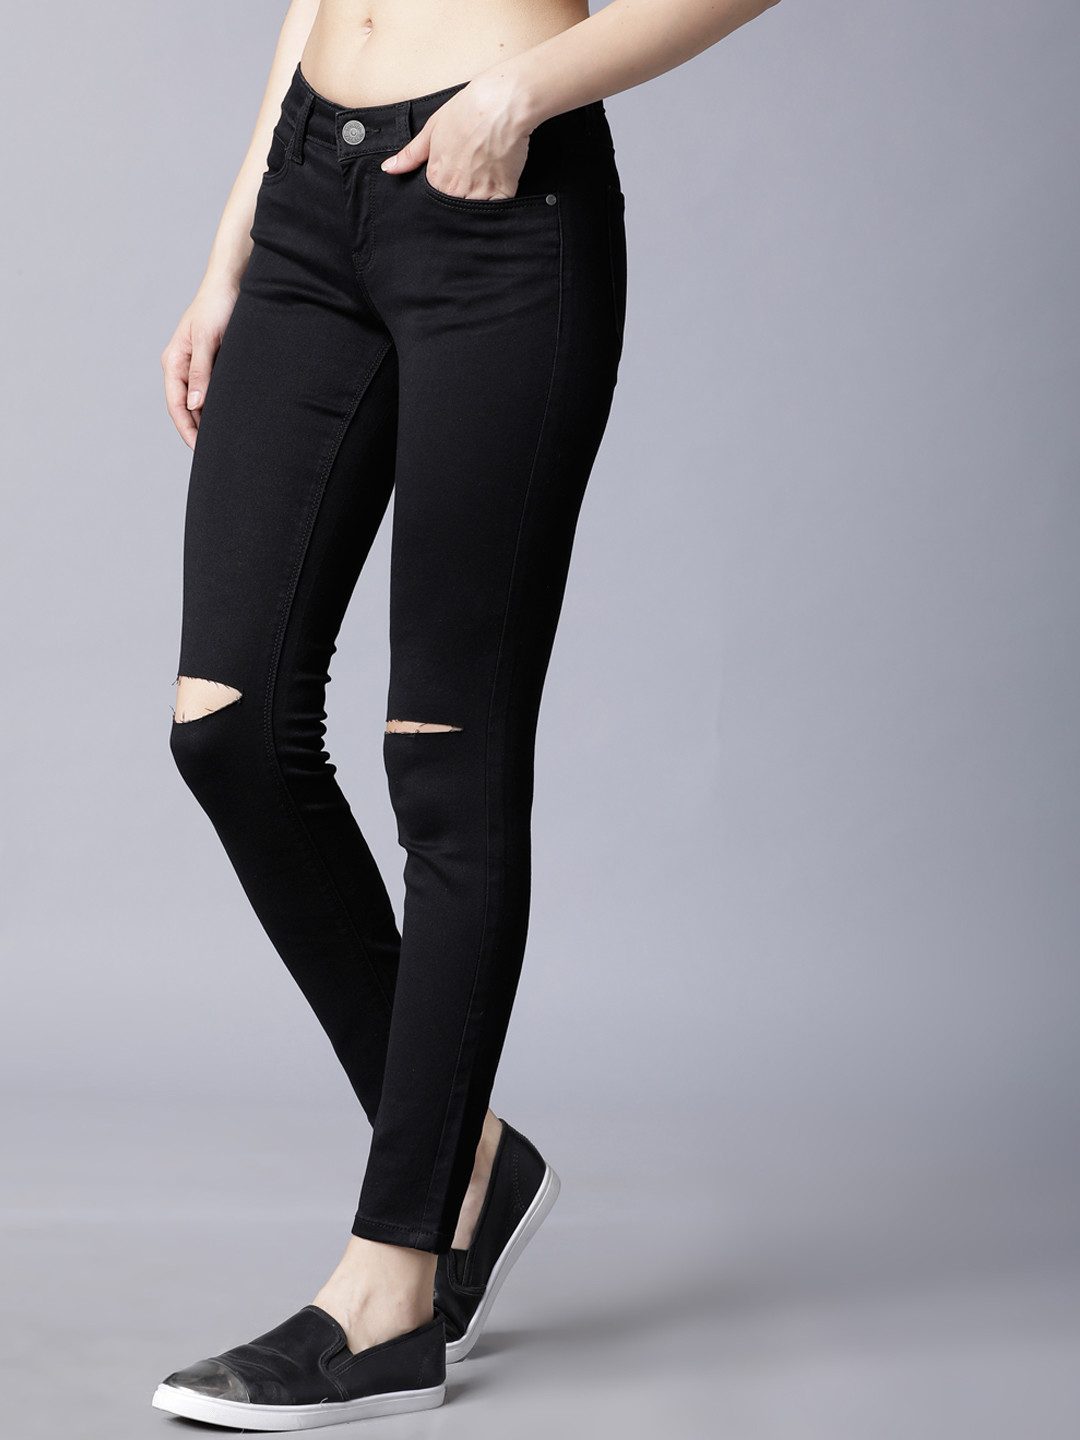 Buy Hootry Women Black Skinny Fit High-Rise Clean Look Stretchable ...